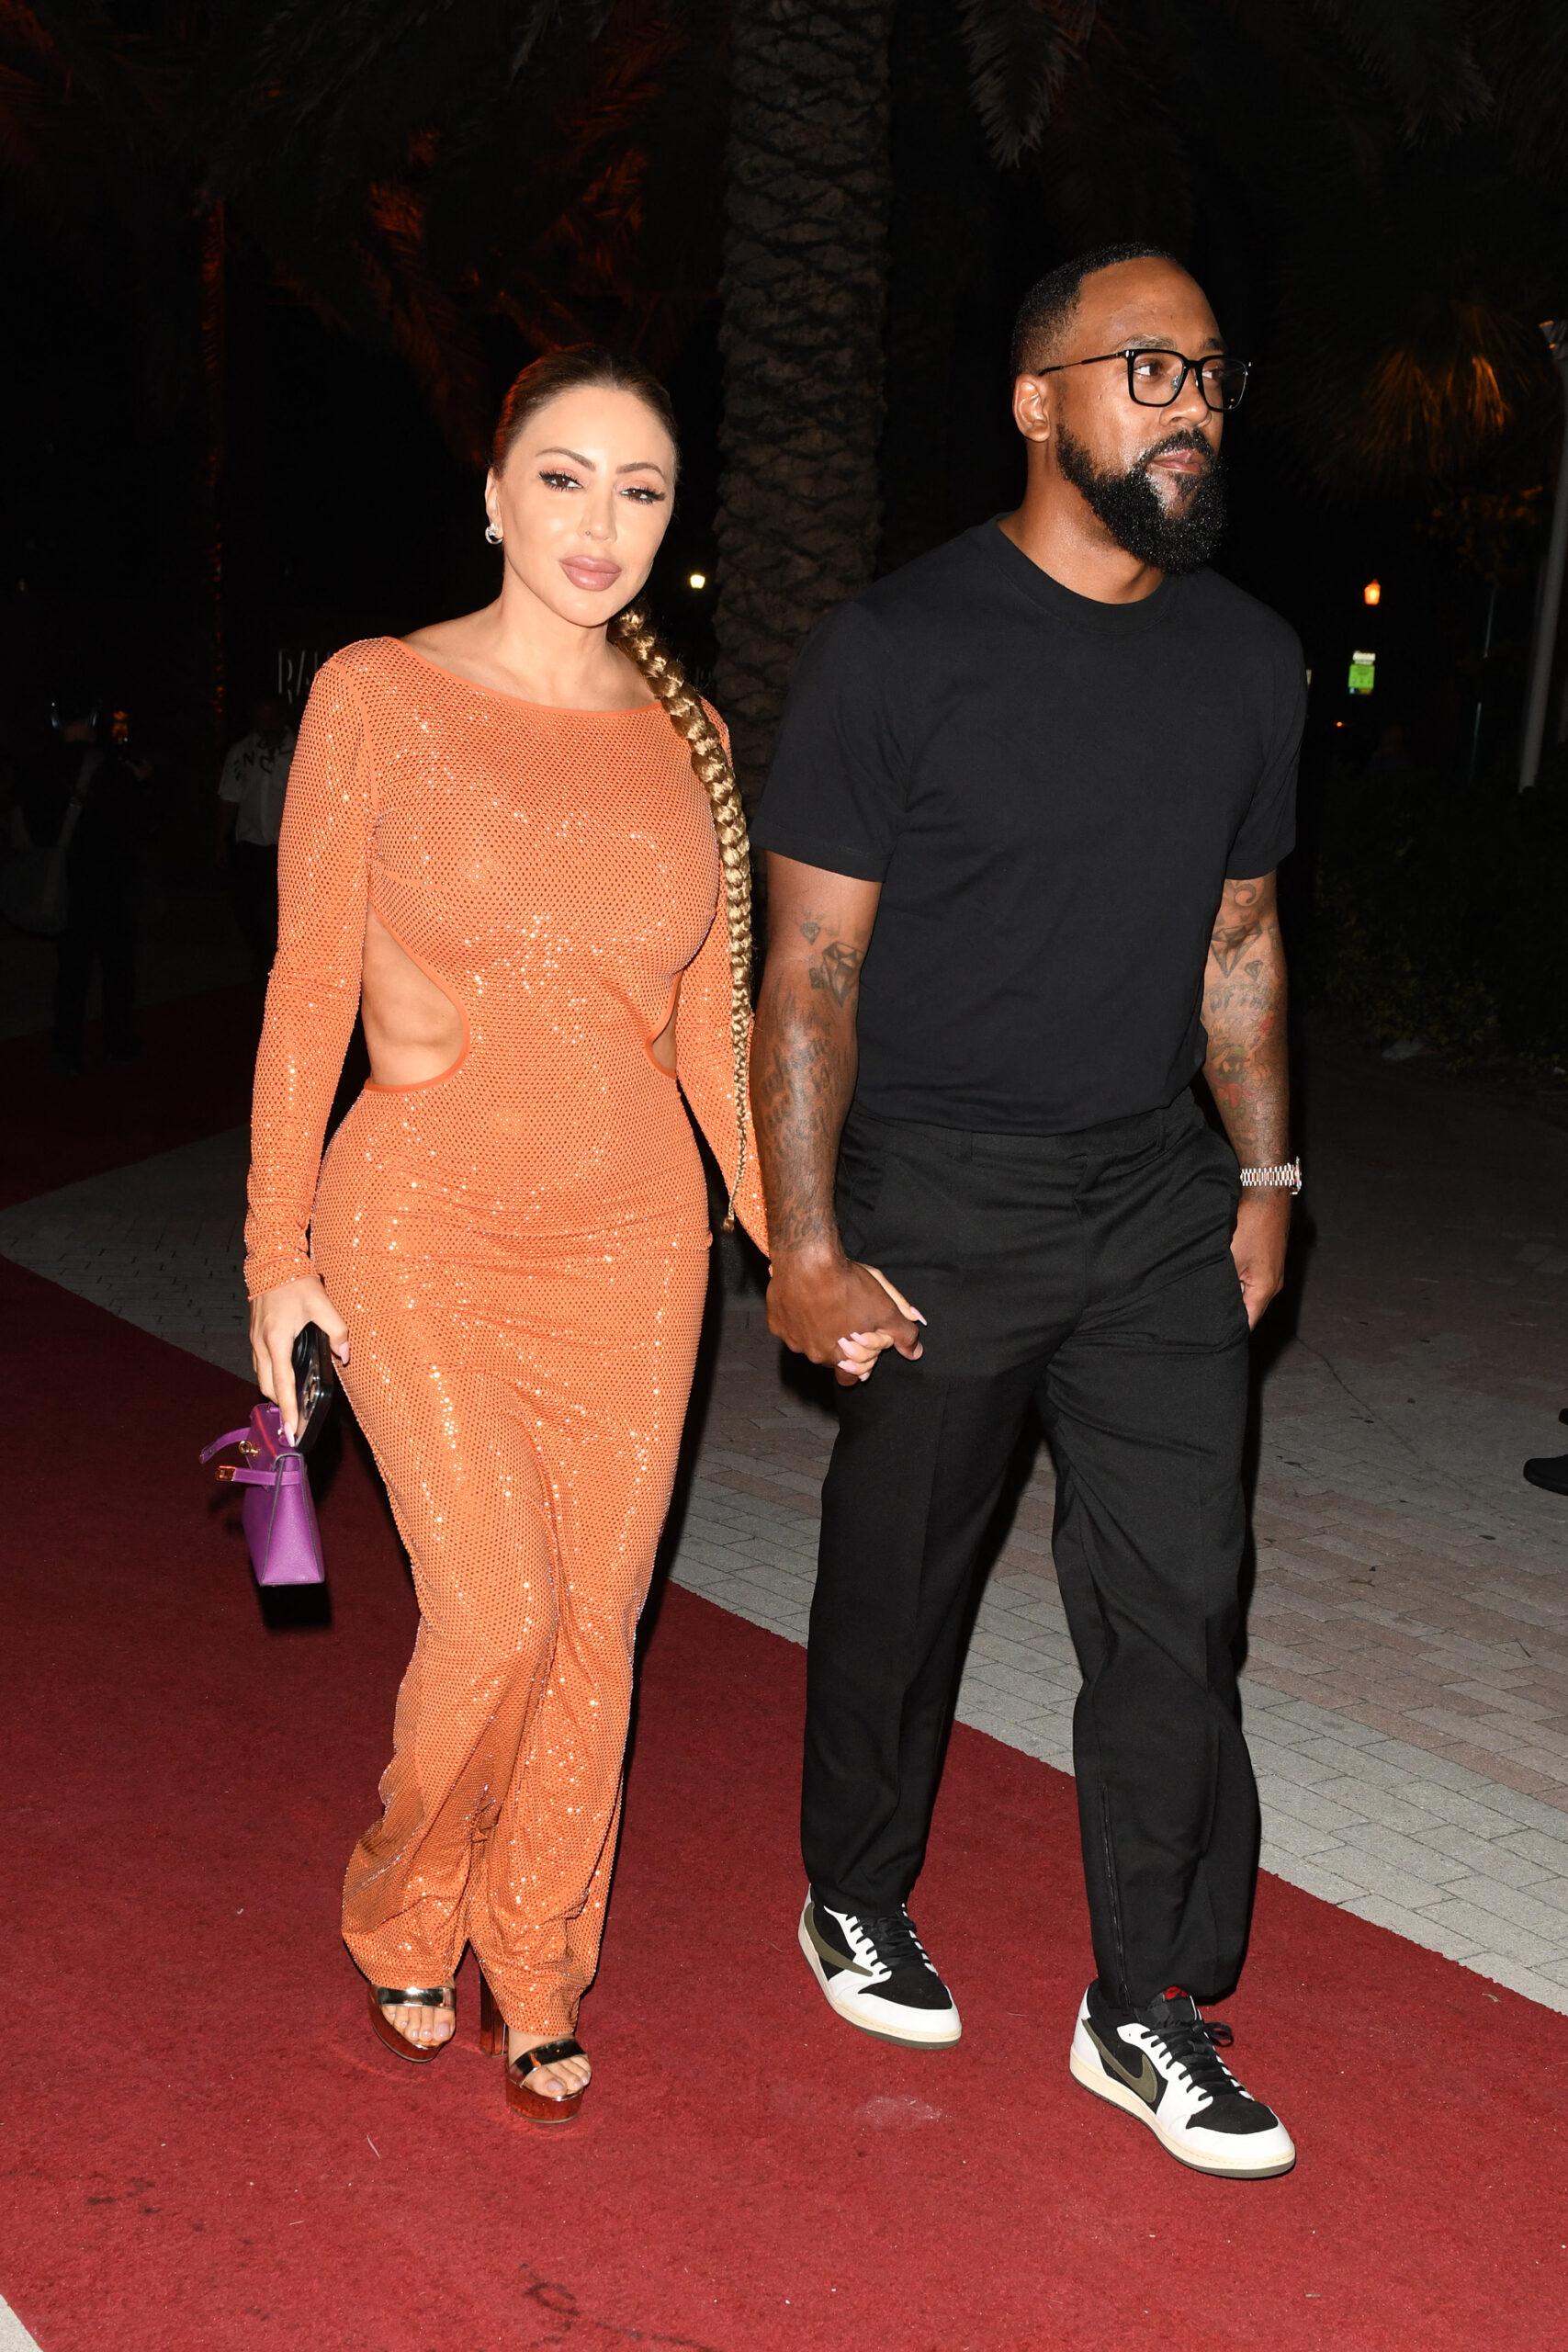 Larsa Pippen & Marcus Jordan Address Backlash Over Their 16-Year Age Gap: 'Age Is Just A Number'